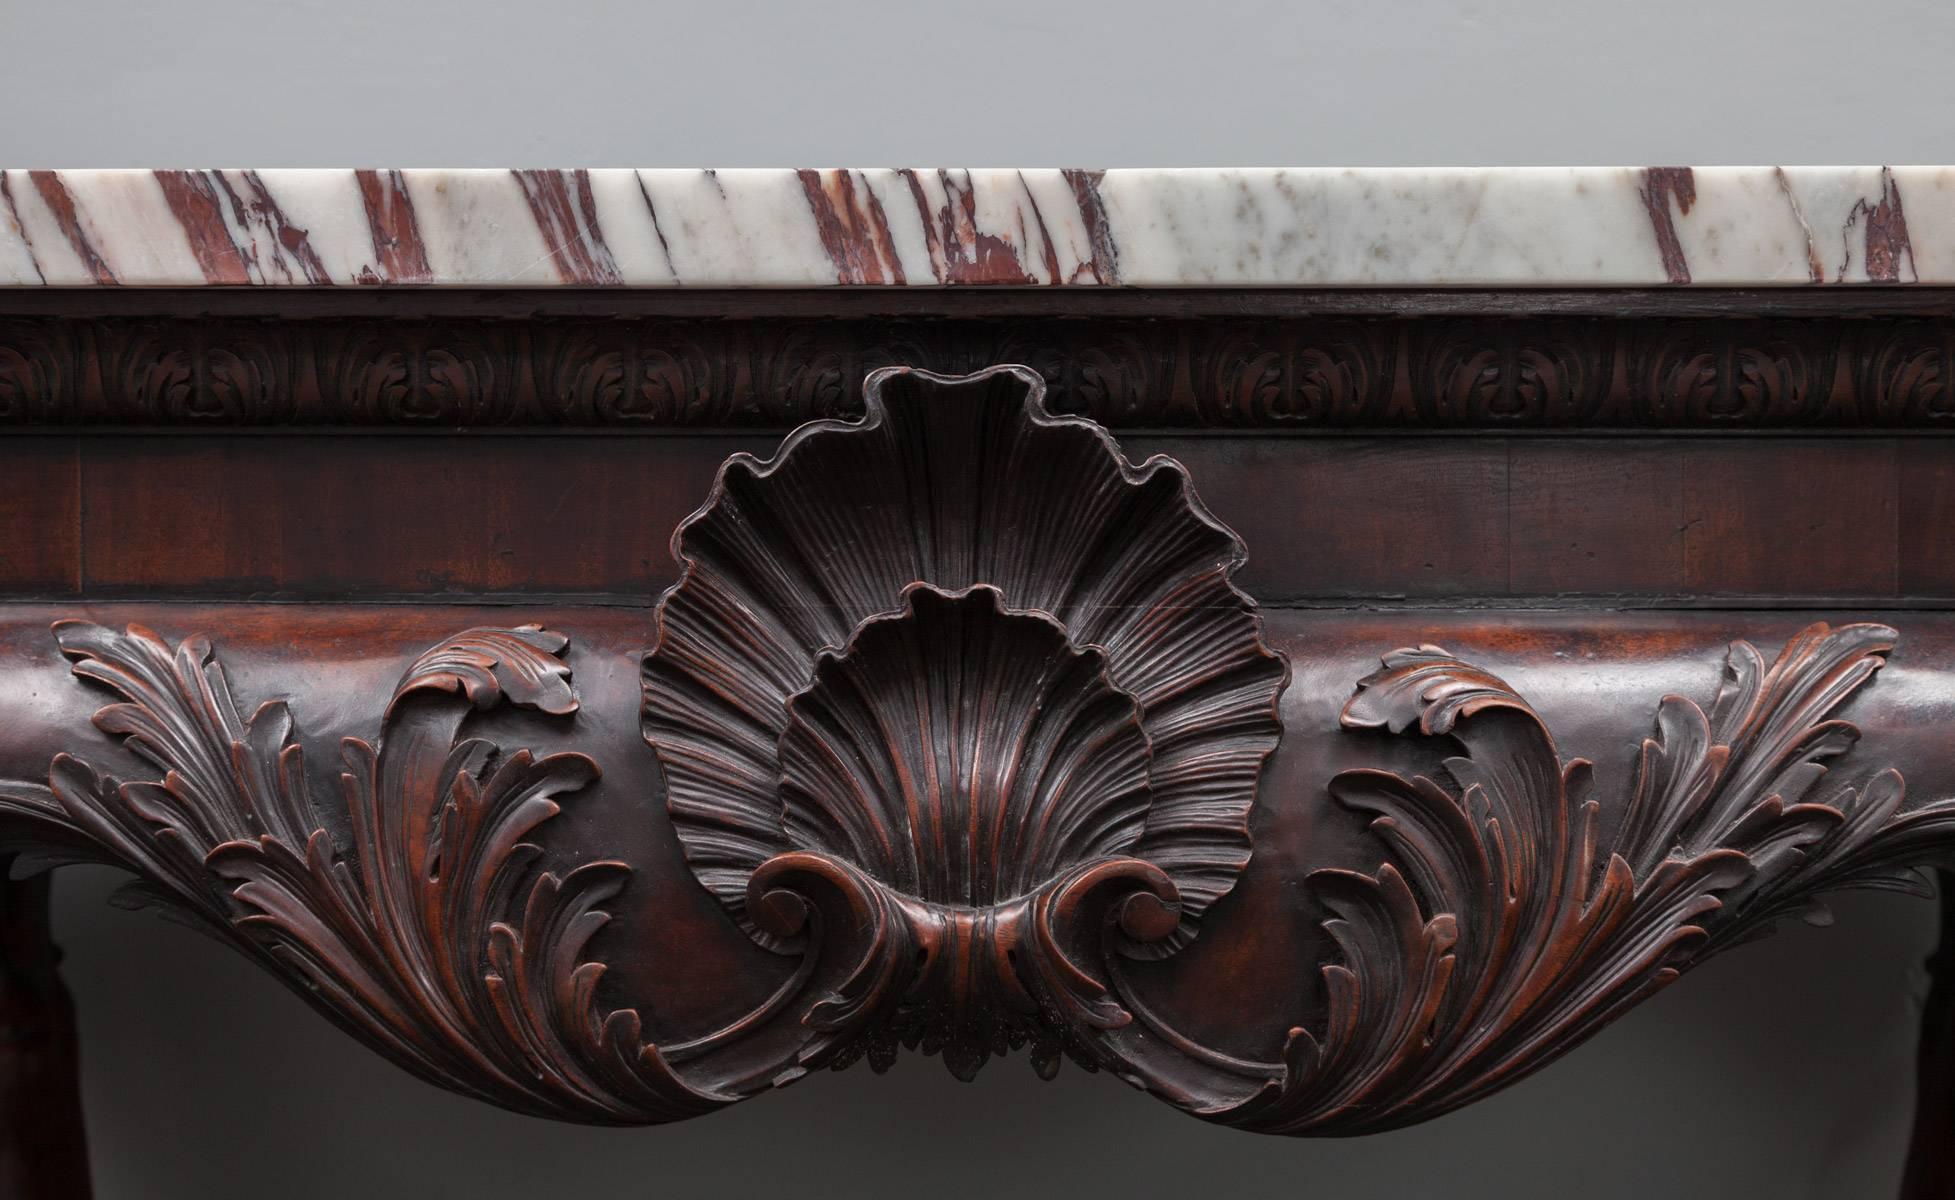 An outstanding 18th century mahogany side table with Breccia violetta marble top. The plain veneered frieze with acanthus moulded cornice supporting the solid Breccia violetta marble top. To the centre apron is a bold and beautifully carved double